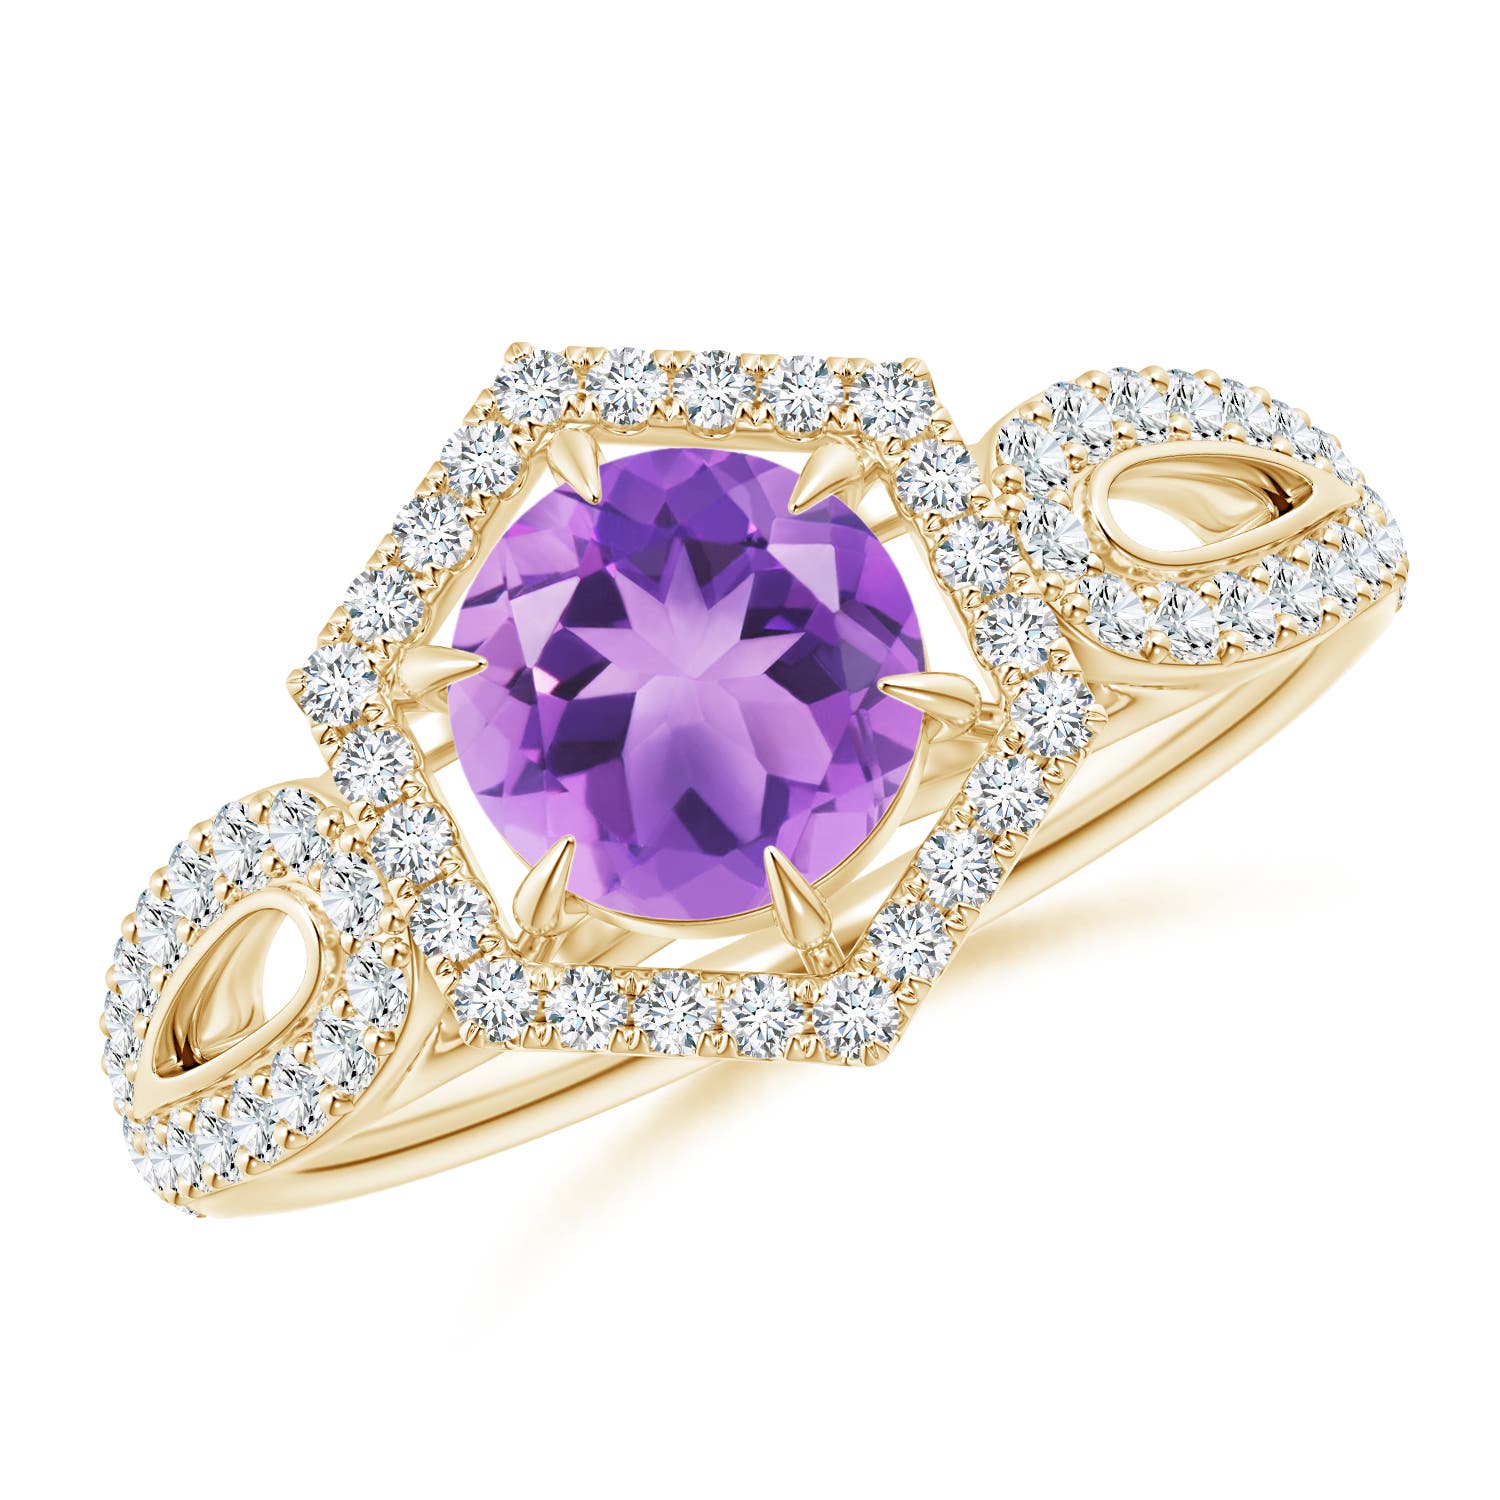 A - Amethyst / 1.26 CT / 14 KT Yellow Gold